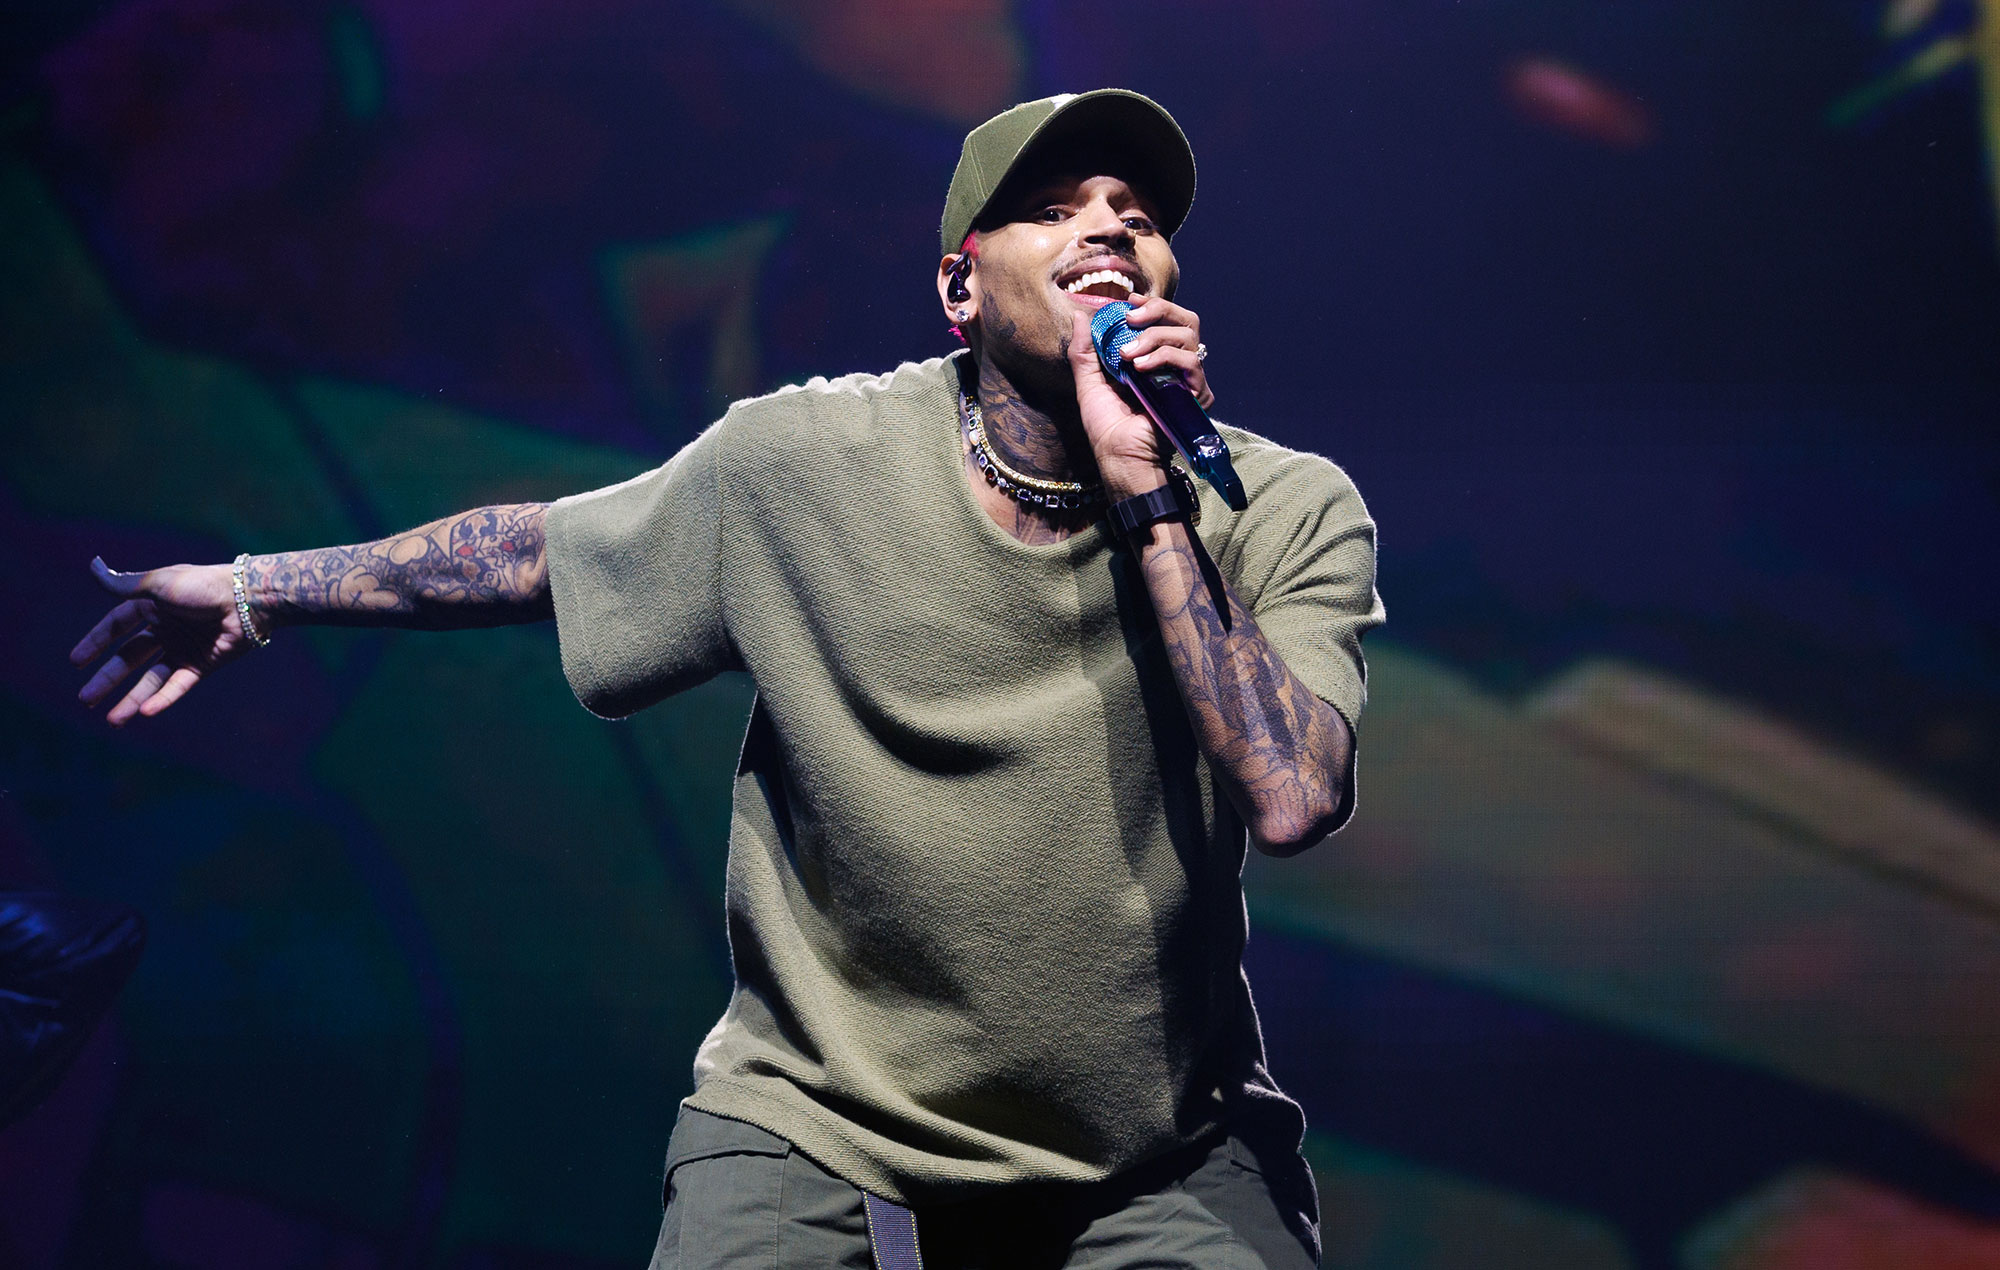 Chris Brown sued for beating man with bottle in London club